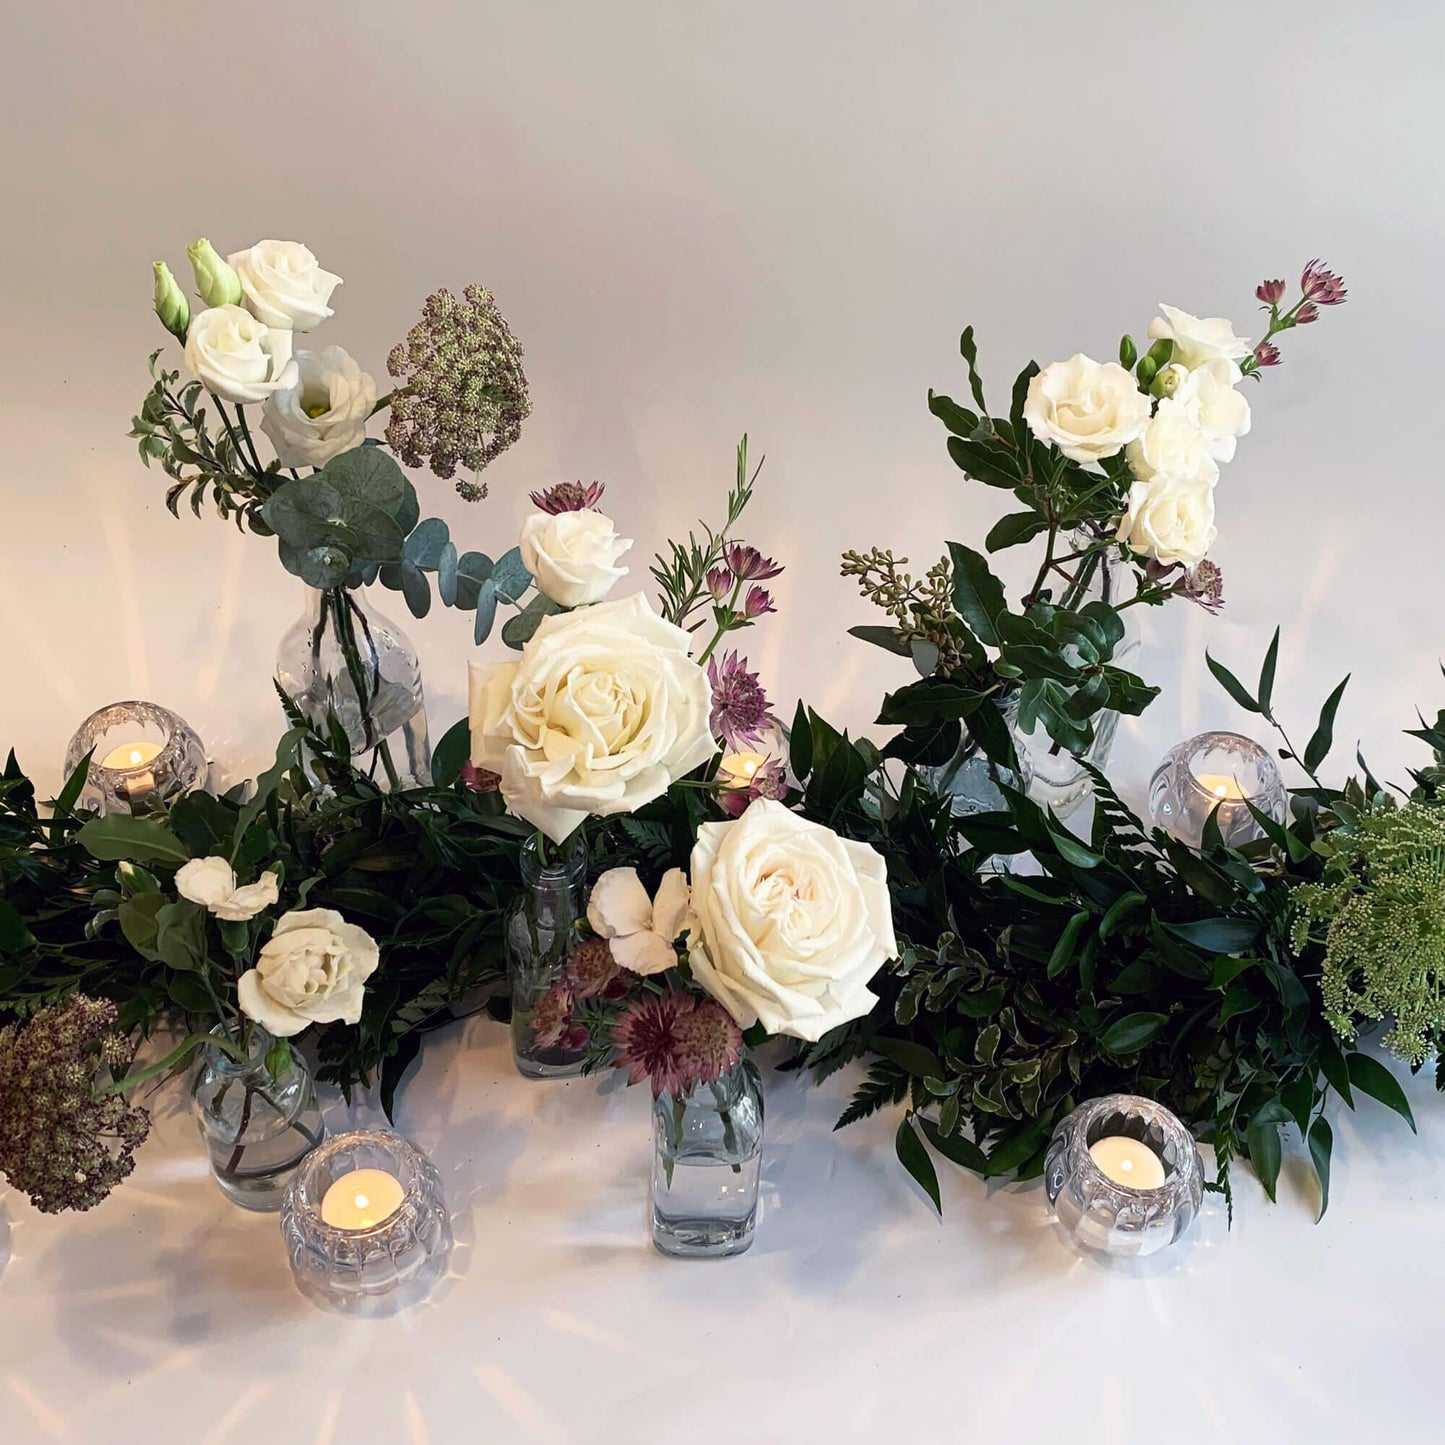 Load image into Gallery viewer, A serene arrangement of white roses, assorted flowers, and greenery in glass vases, accentuated by the soft glow of candles in crystal holders against a light backdrop. Order online for same-day flower delivery from the best wedding florist in Toronto near you.
